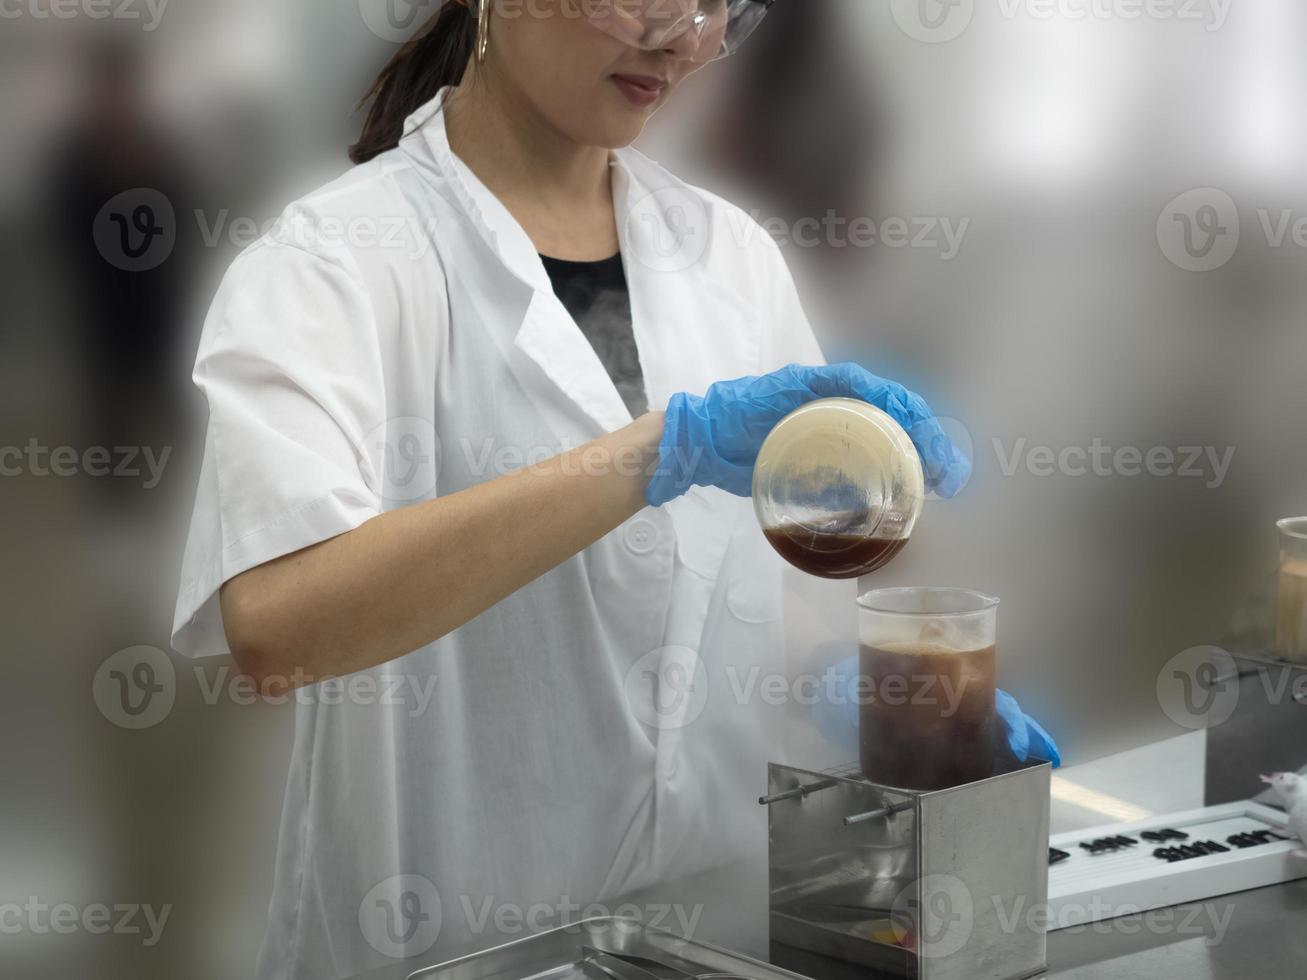 Hospital clinic laboratory doctor nurse scientist female protect ppe glove white blue uniform bottle technology test medical vaccine research treatment healthcare safety covid-19 corona virus patient photo